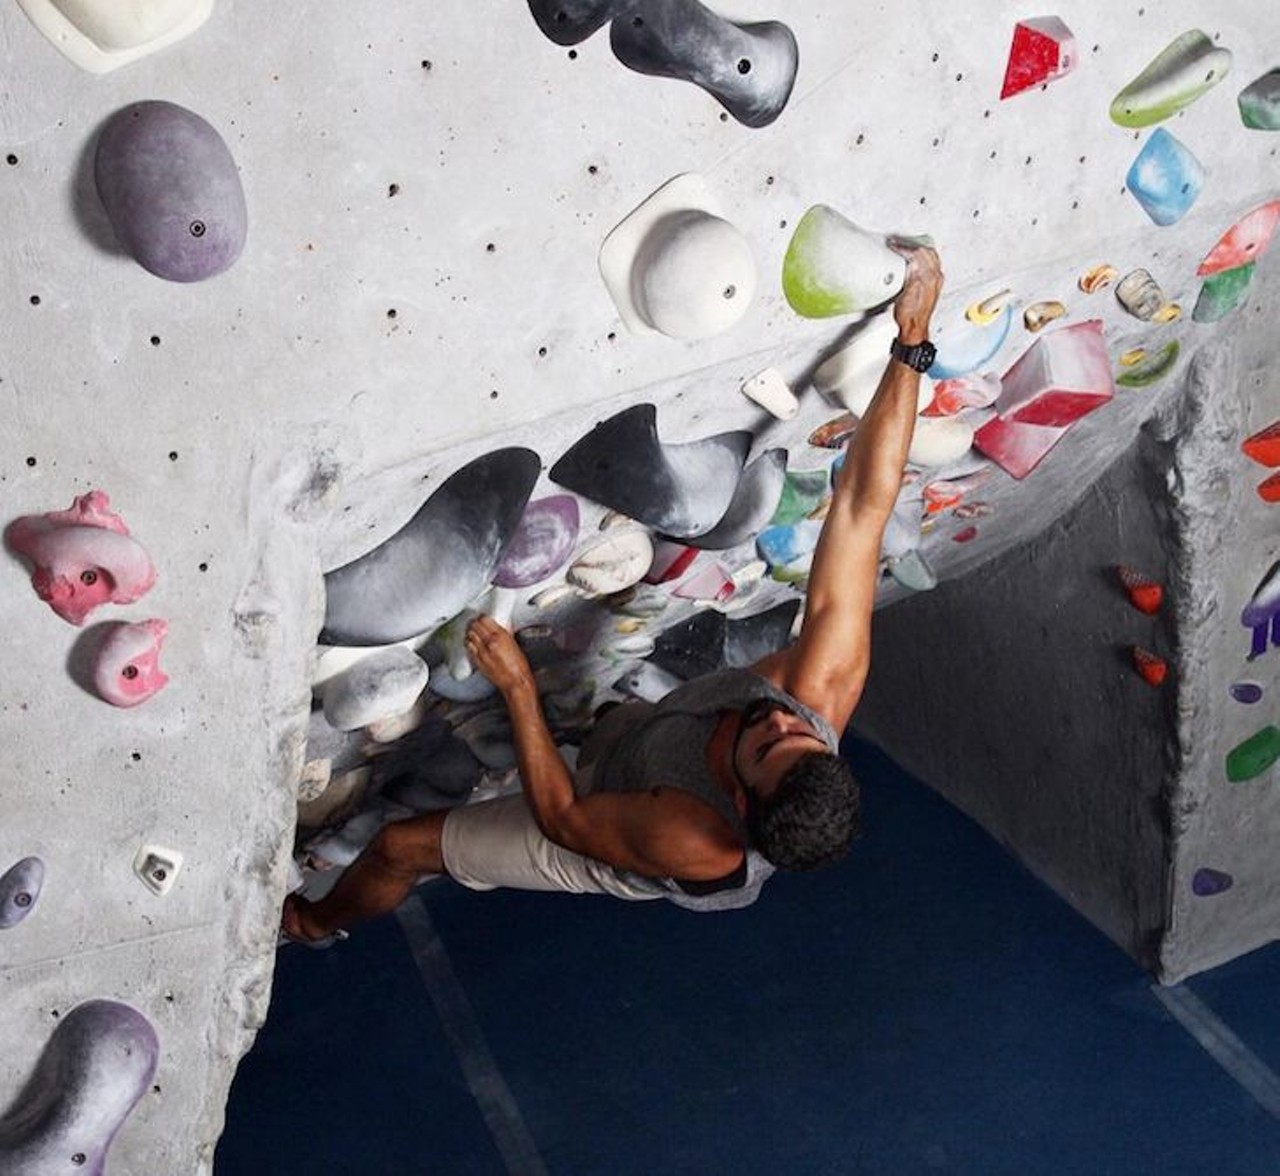 Get over your fear of heights at Aiguille
Aiguille Rock Climbing | 999 Charles St., Longwood | 407-332-1430 
Climbing up a rock wall isn't that much easier just because it's indoors. Give bouldering a try, or climb around on a shorter wall like you're Spider-Man.
Photo via bbossque/Instagram